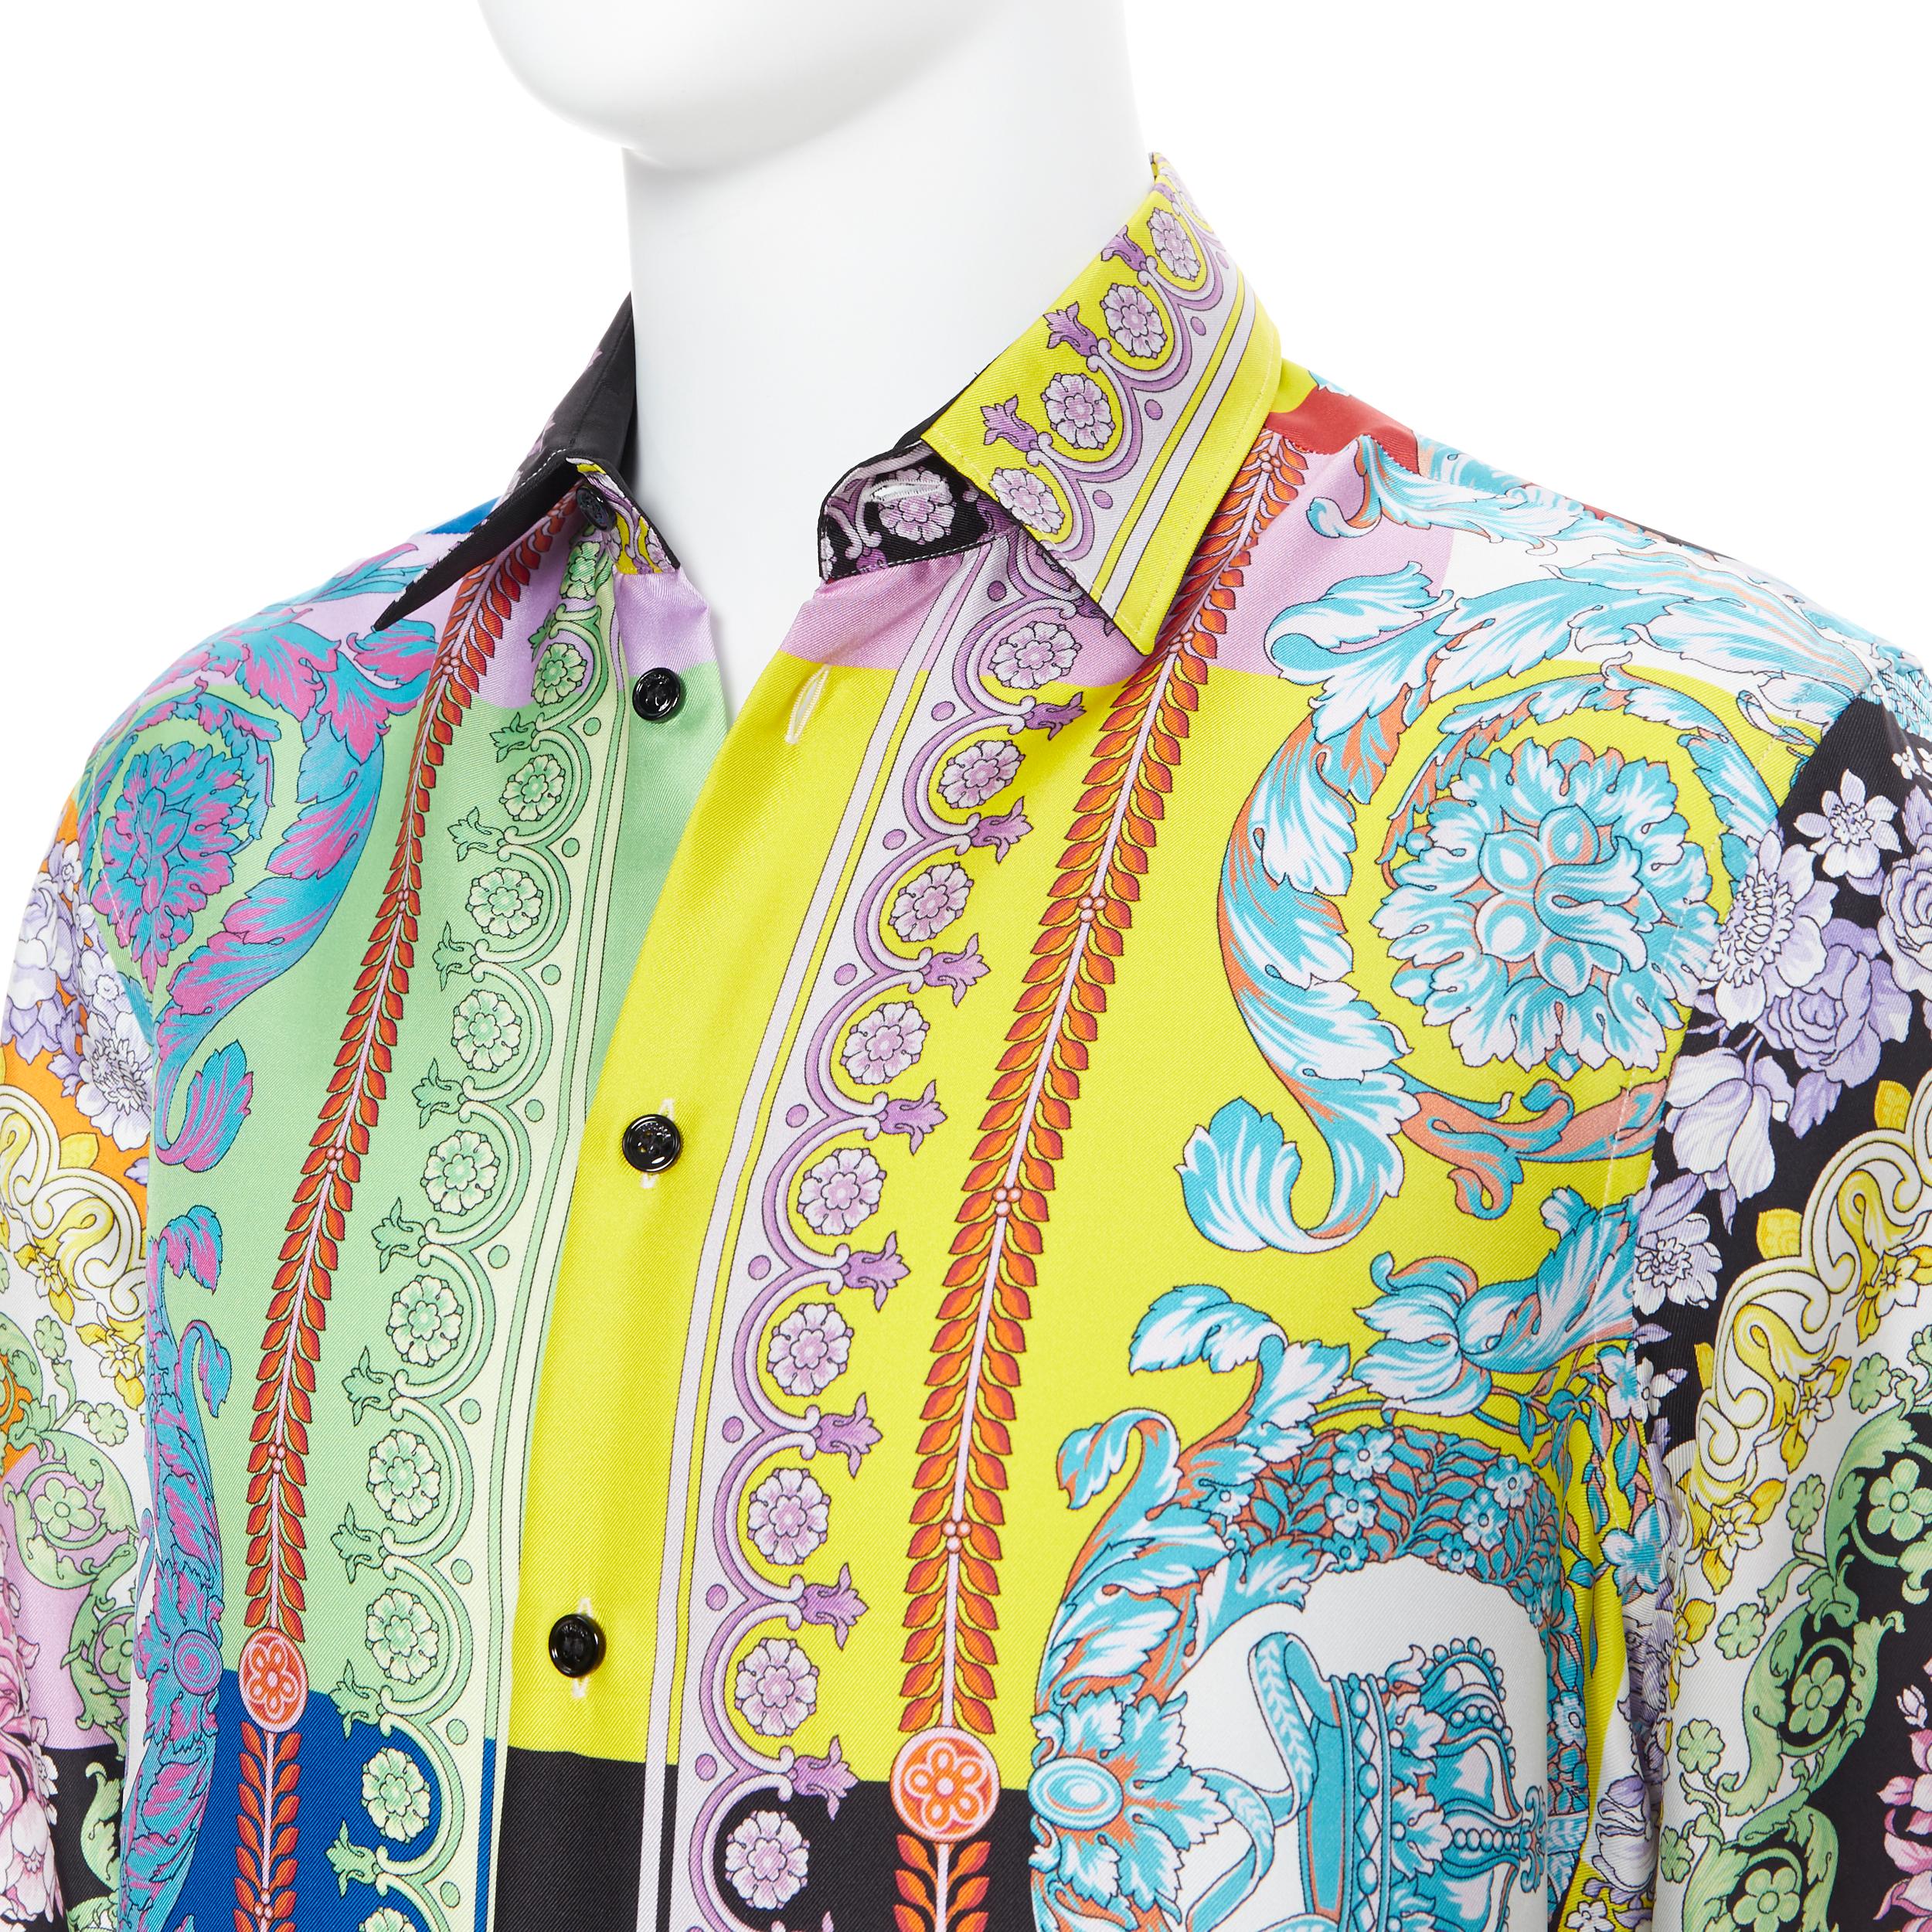 new VERSACE SS19 Techni Baroque floral print 100% silk relaxed  shirt top EU38 S
Brand: Versace
Designer: Donatella Versace
Collection: SS19
Model Name / Style: Silk shirt
Material: Silk
Color: Blue
Pattern: Floral
Closure: Button
Extra Detail: